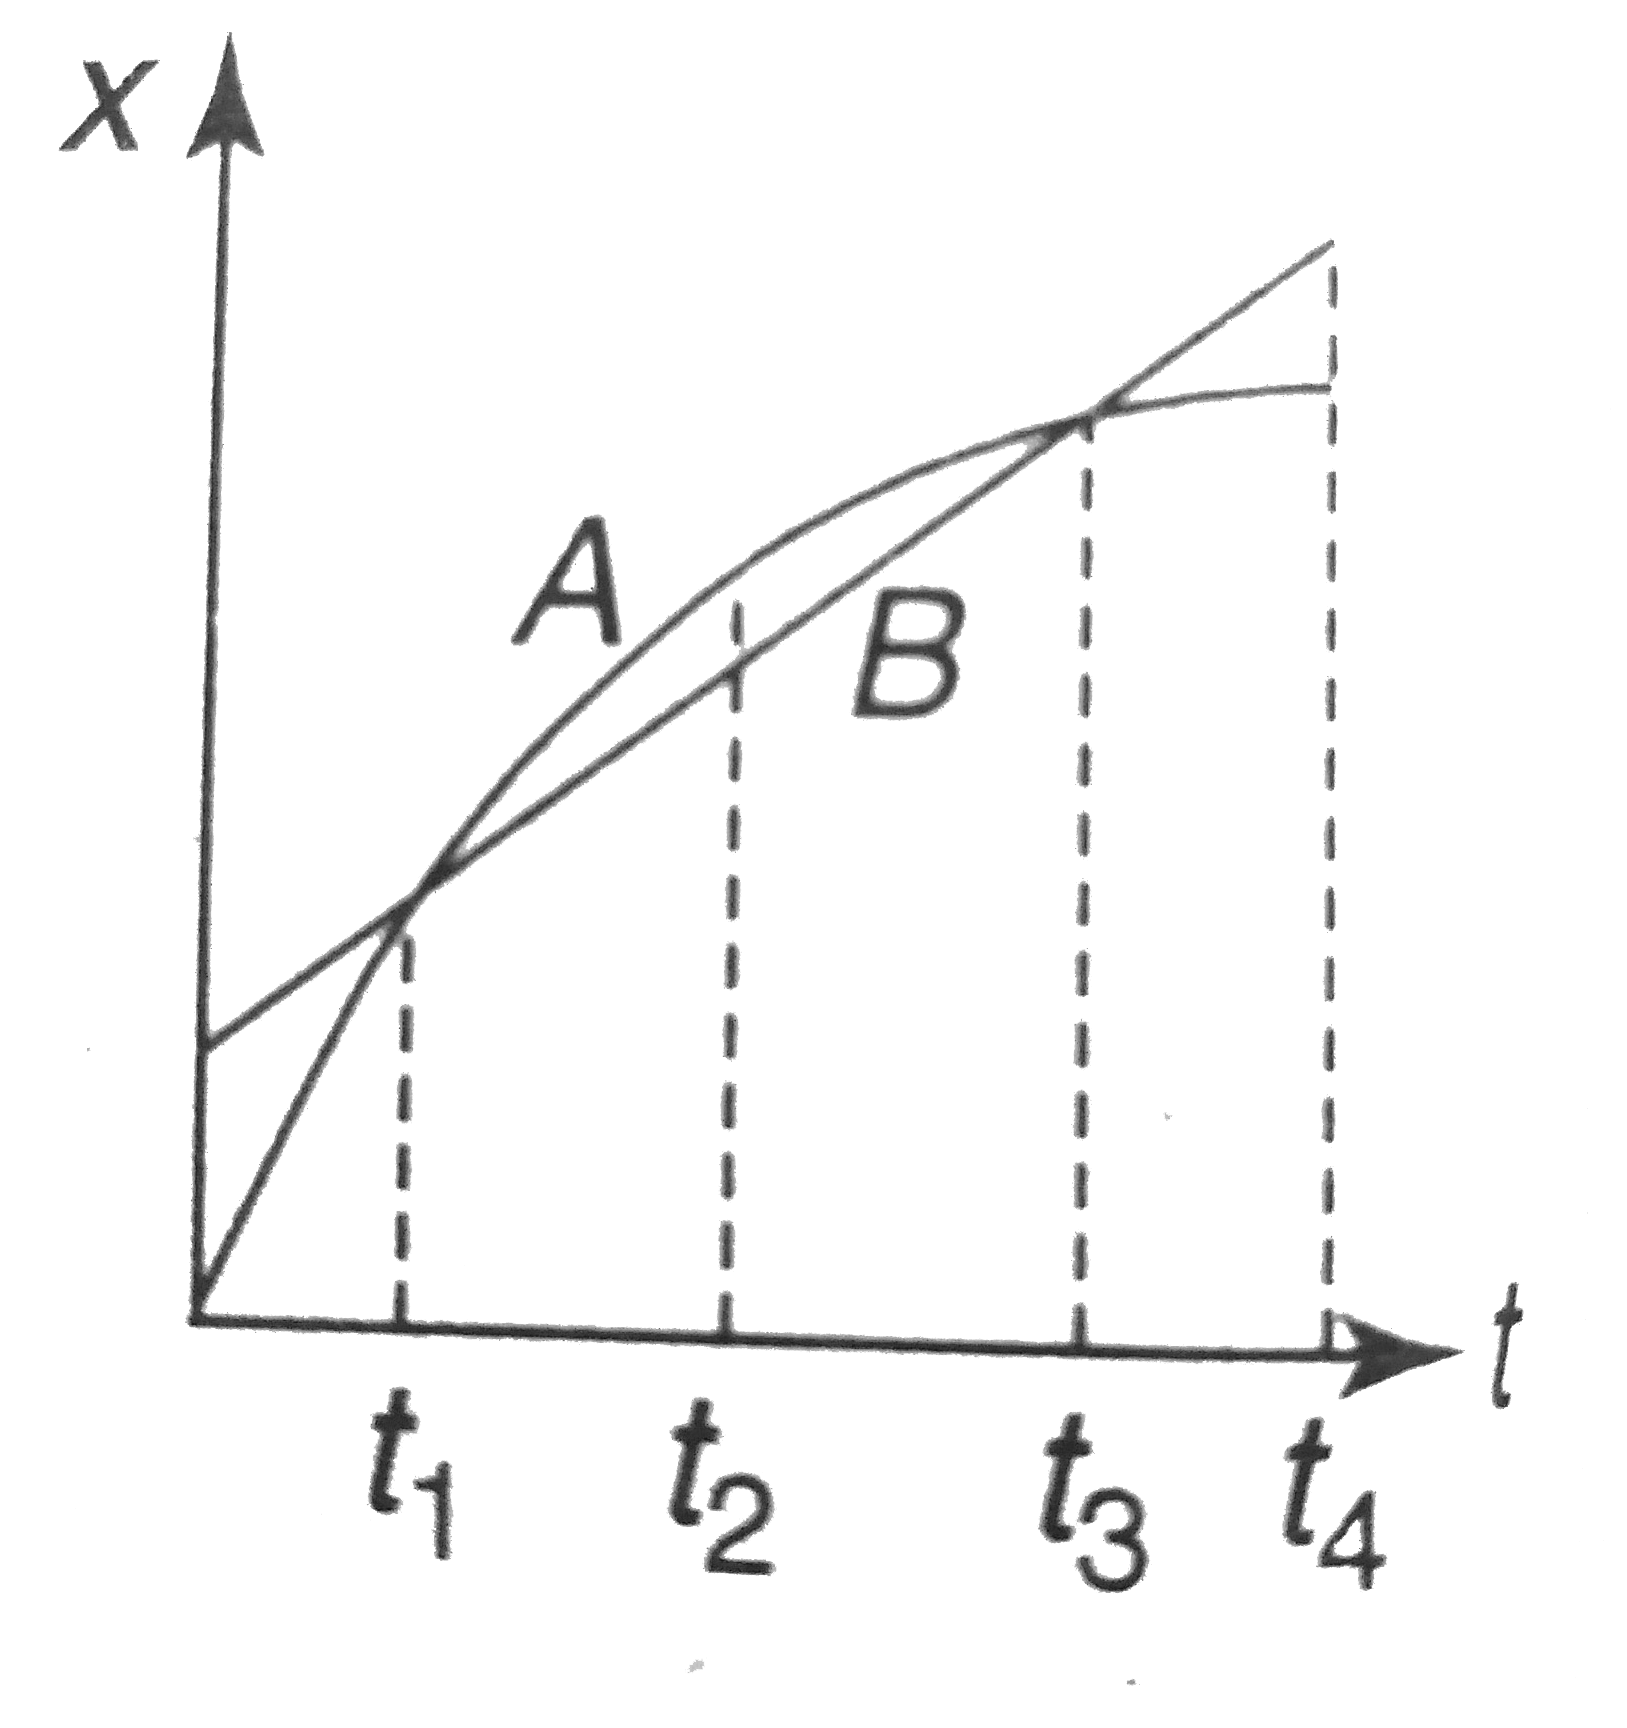 The graph given shows the positions of two cars, A and B, as a function of time. The cars move along the x-axis on parallel but separate tracks, so that they can pass each other's position without colliding. At which instant in time is car-A overtaking the car-B ?